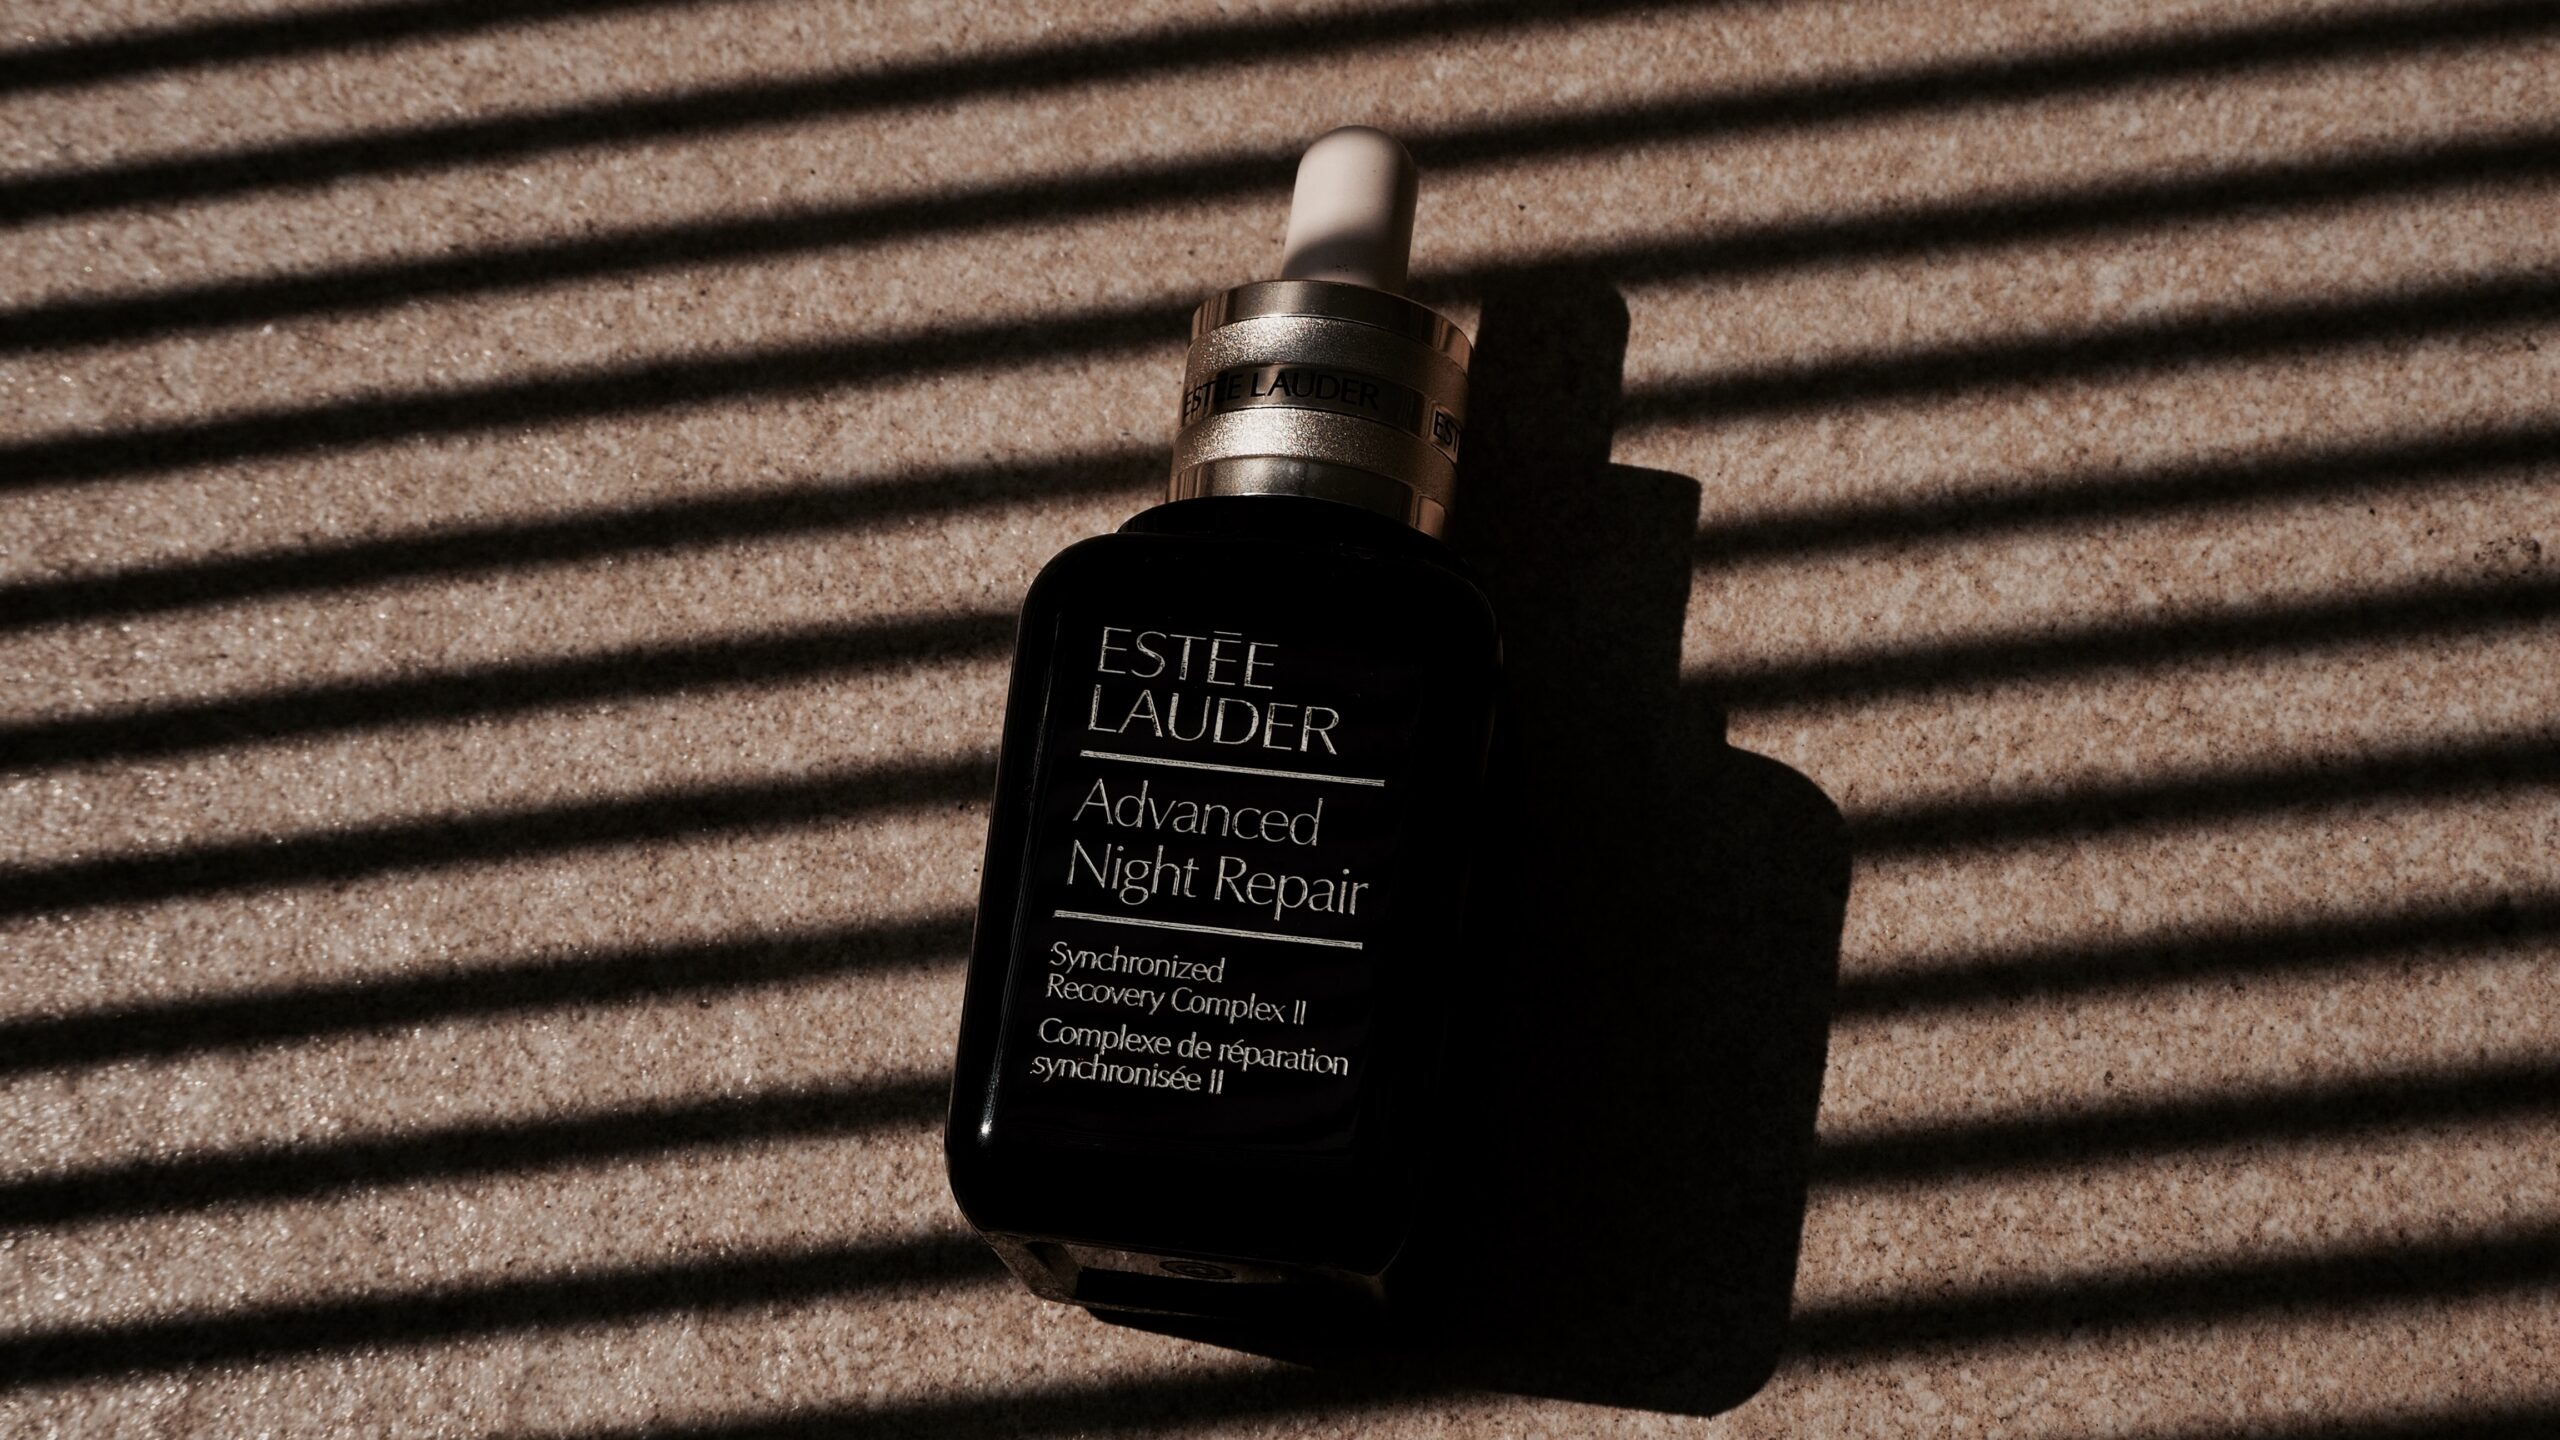 [Thoughts] Estee Lauder Advanced Night Repair Synchronized Recovery Complex II